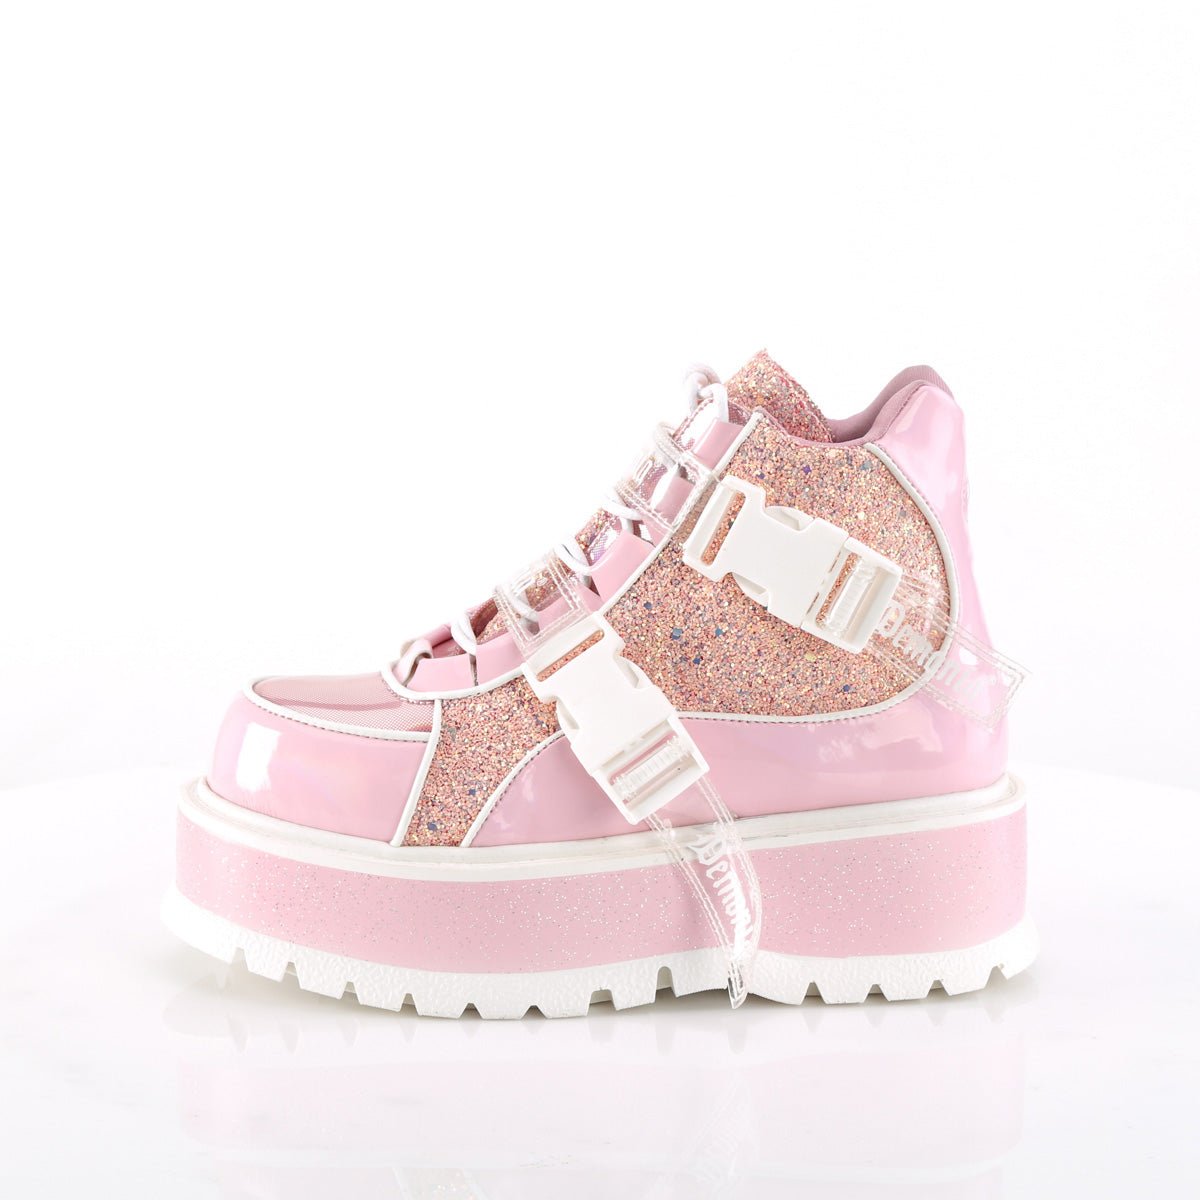 Too Fast | Demonia Slacker 50 | Baby Pink Patent Leather &amp; Glitter Women&#39;s Ankle Boots